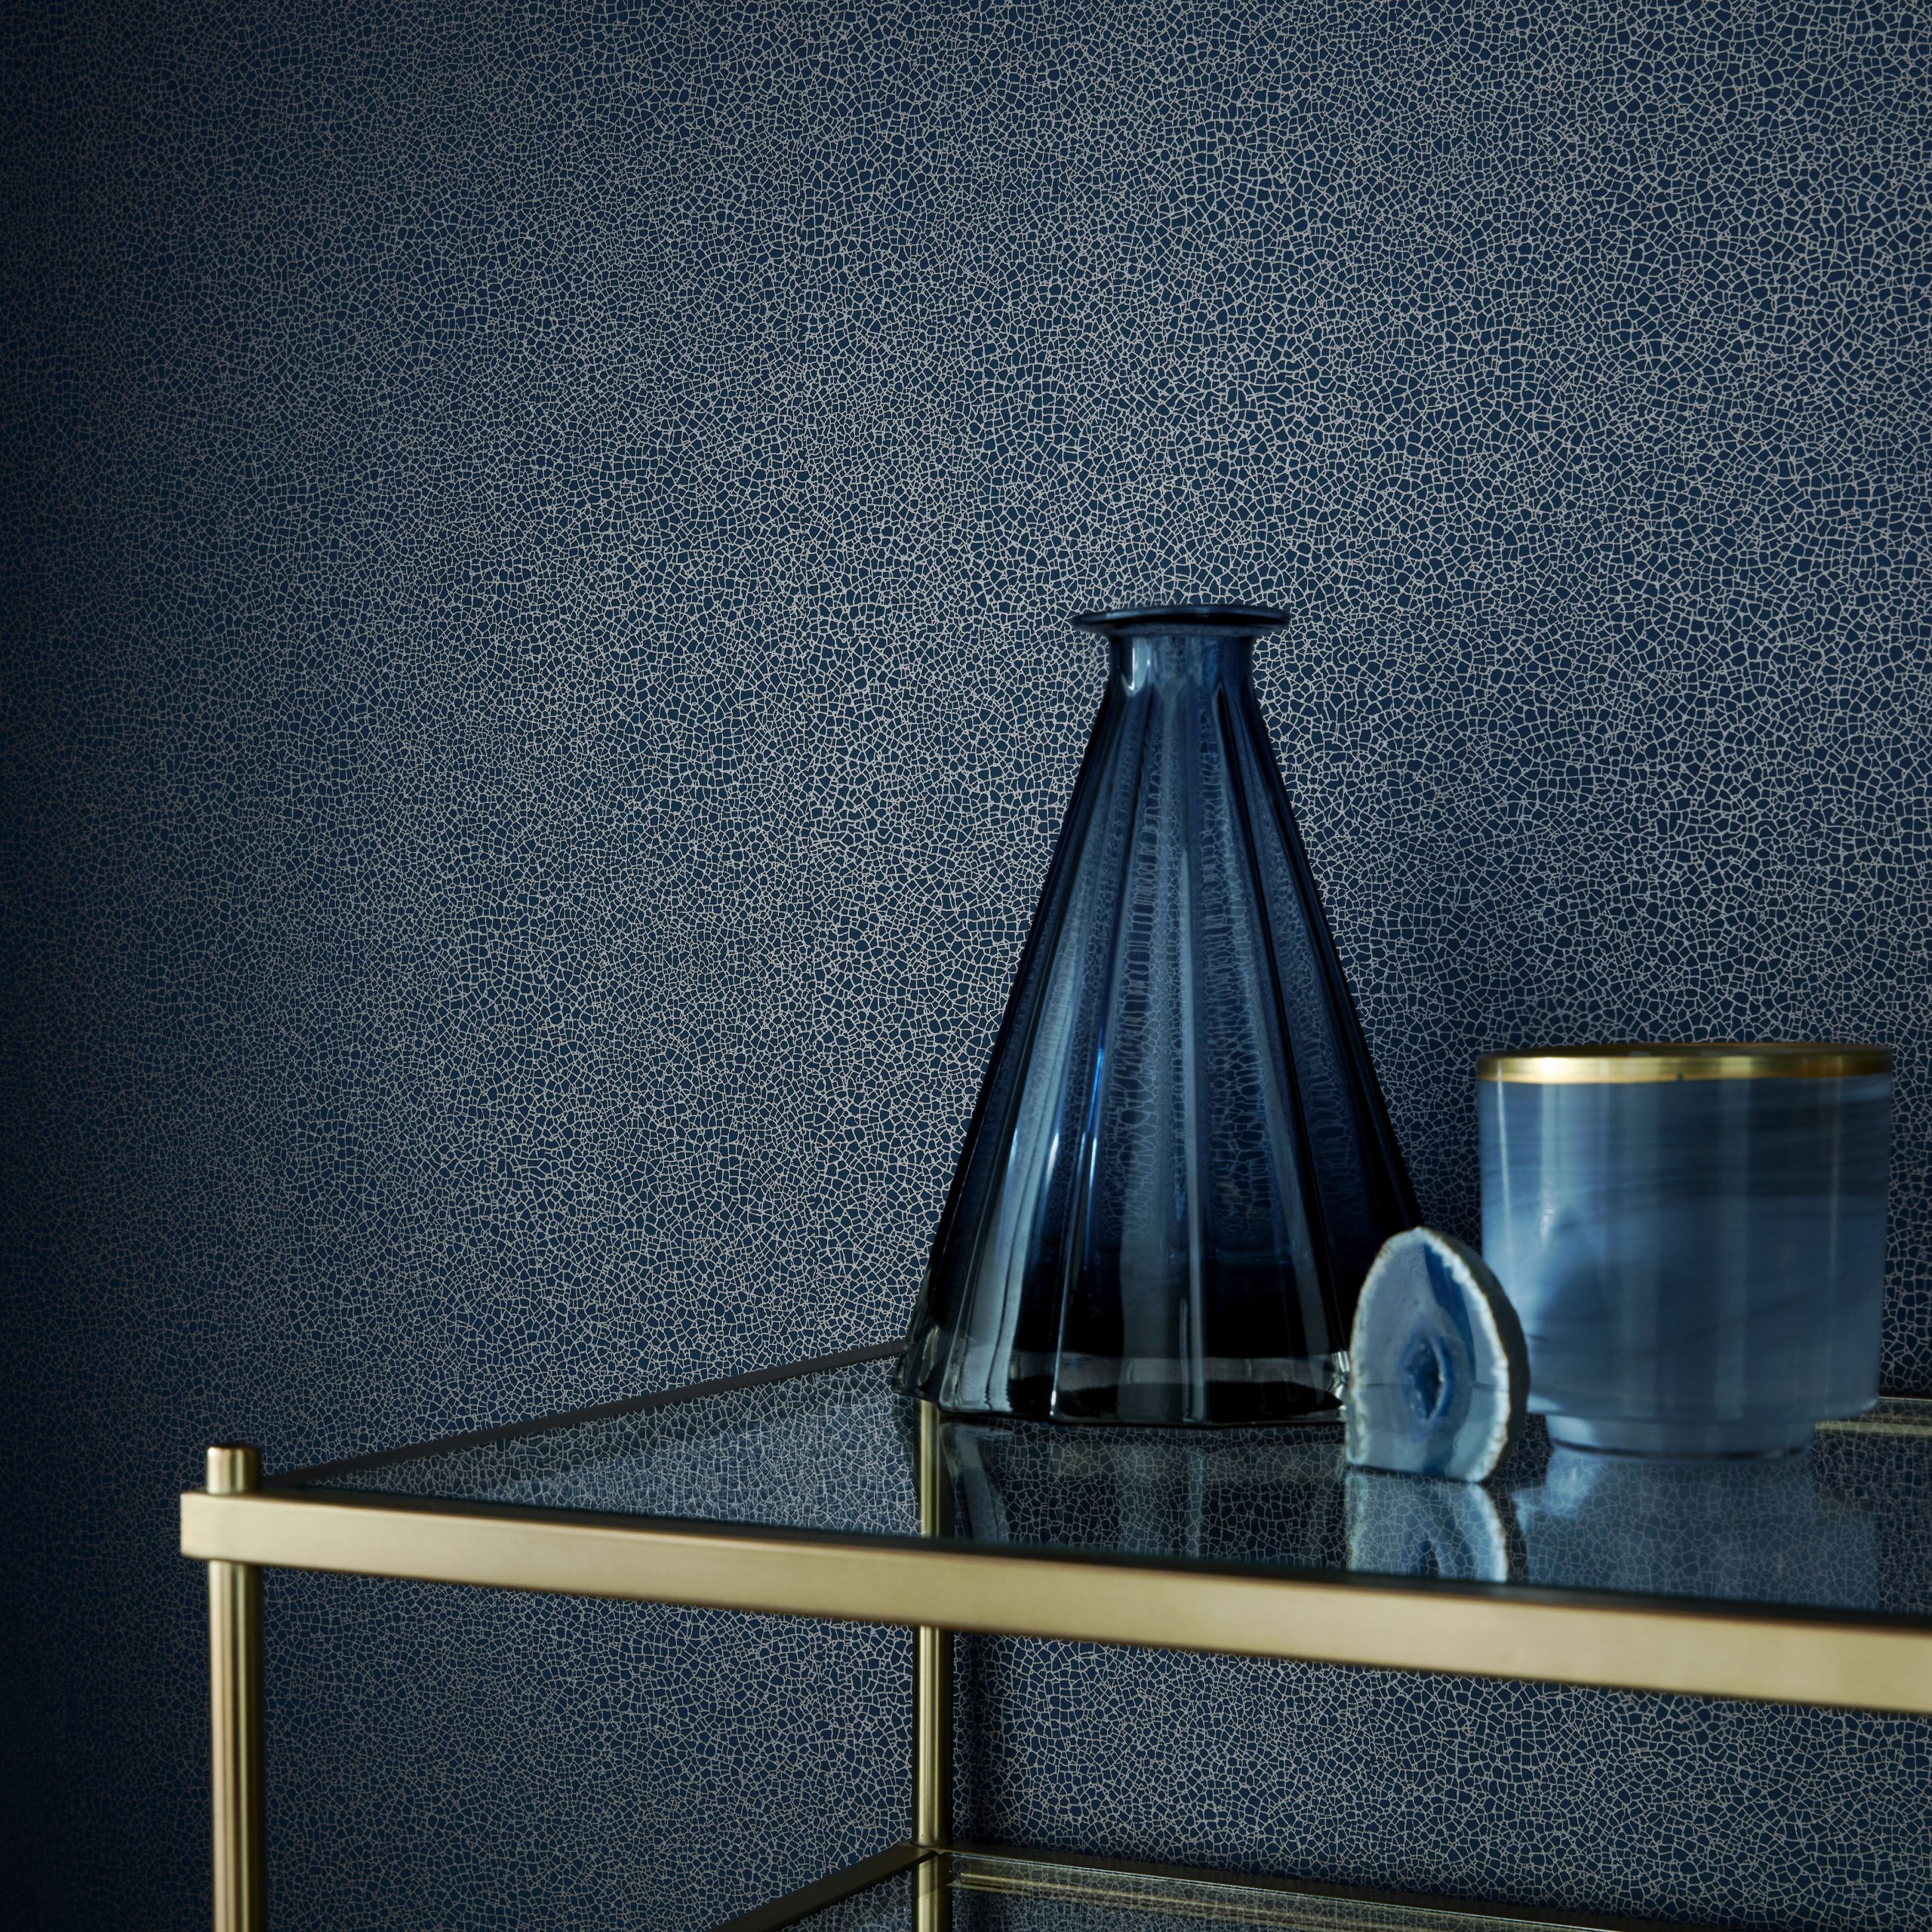 Tapet Emile, Midnight Blue Luxury Crackle, 1838 Wallcoverings, 5.3mp / rola 1838